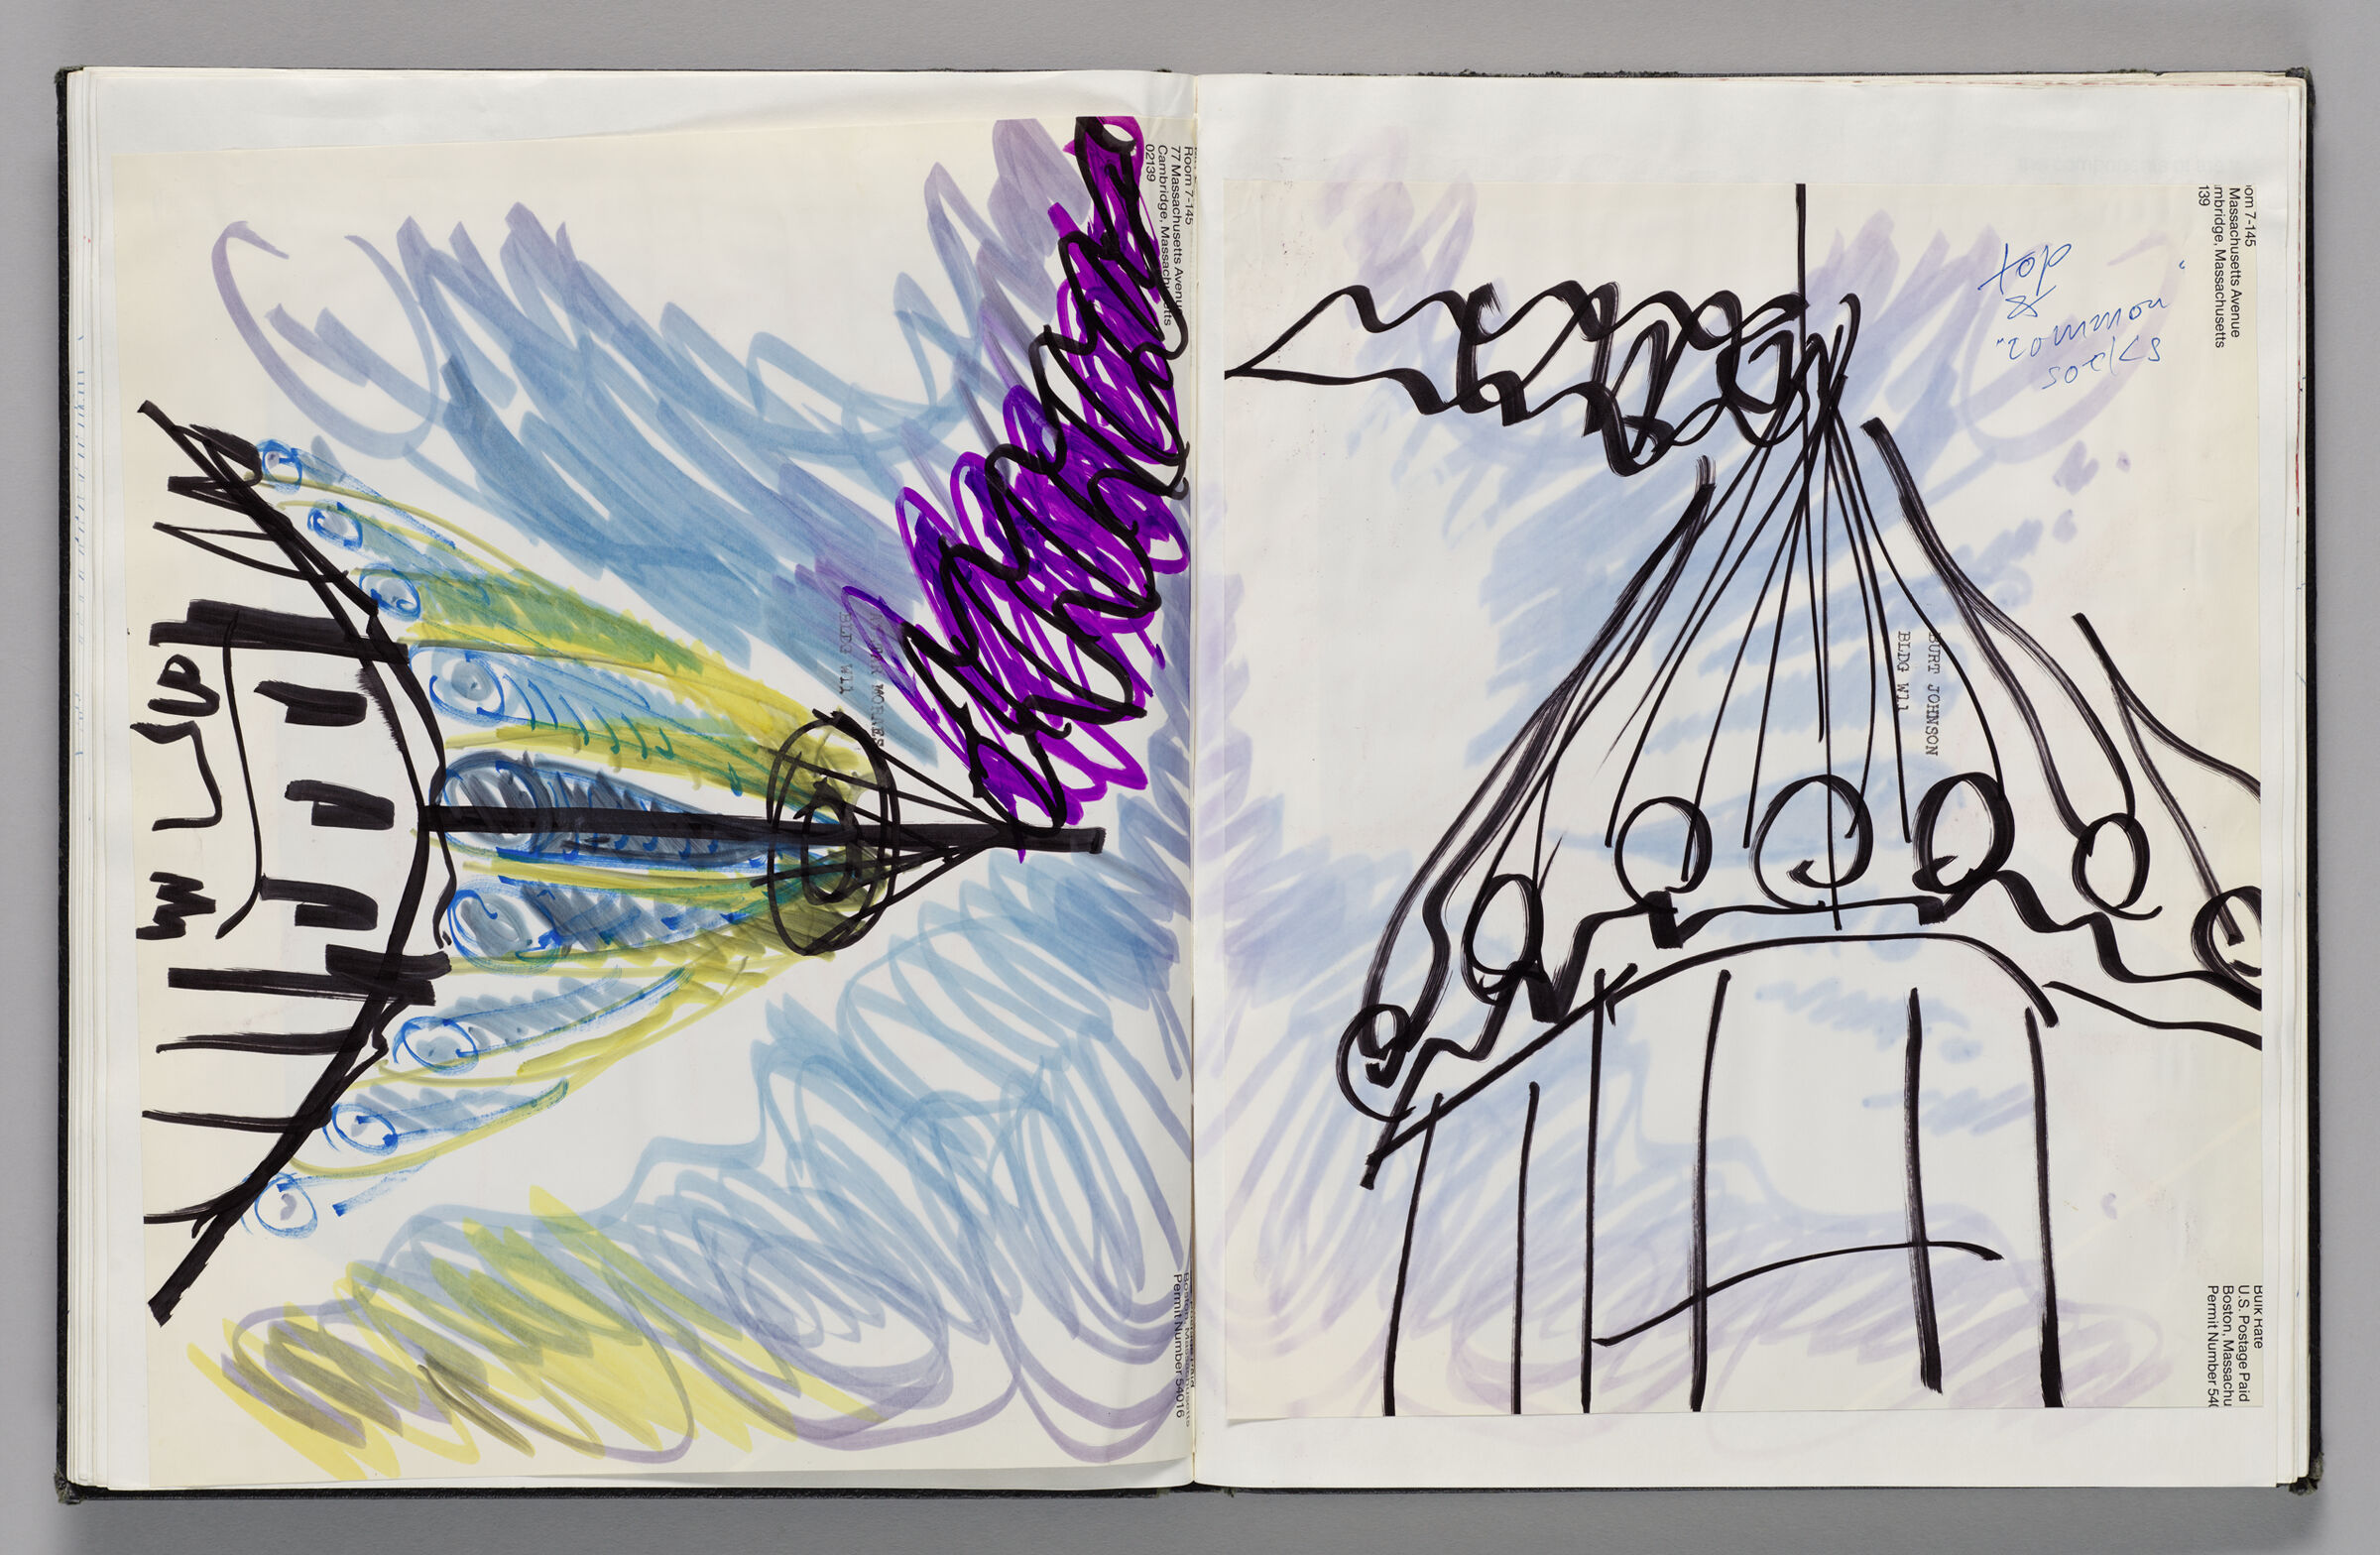 Untitled (Pasted Sketch, Left Page); Untitled (Pasted Sketch With Note, Right Page)